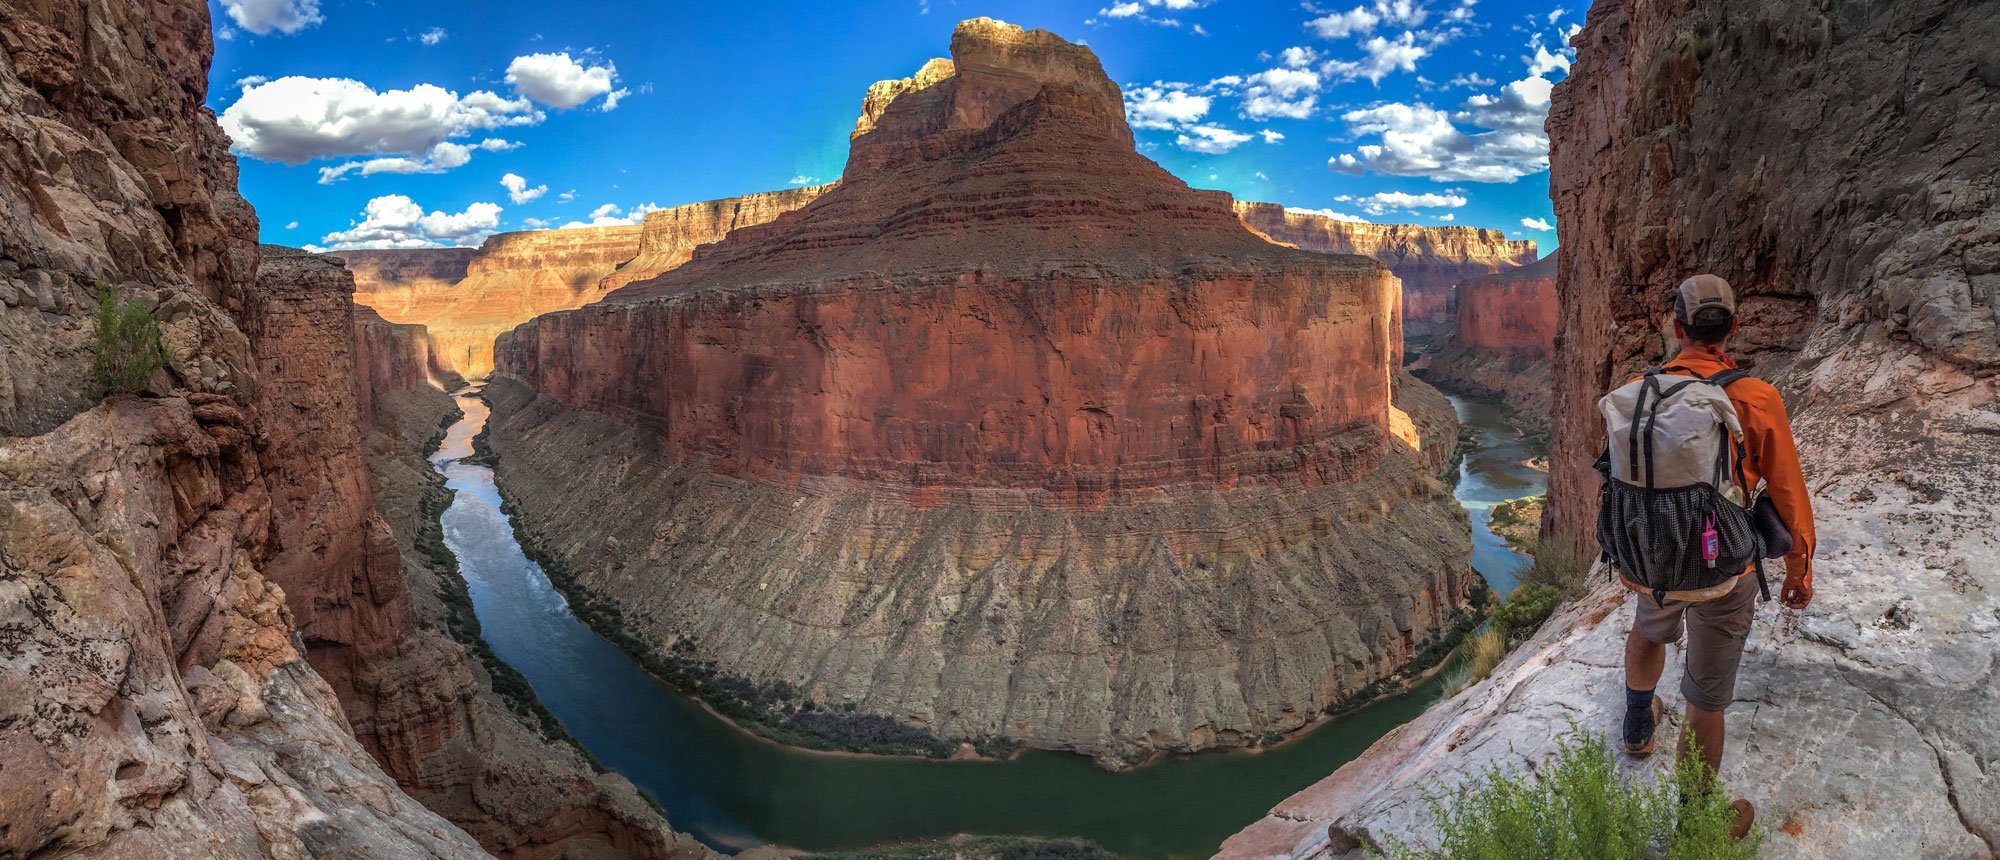 Adventures Below the Rim: 16 Days, 200 Miles in the Grand Canyon